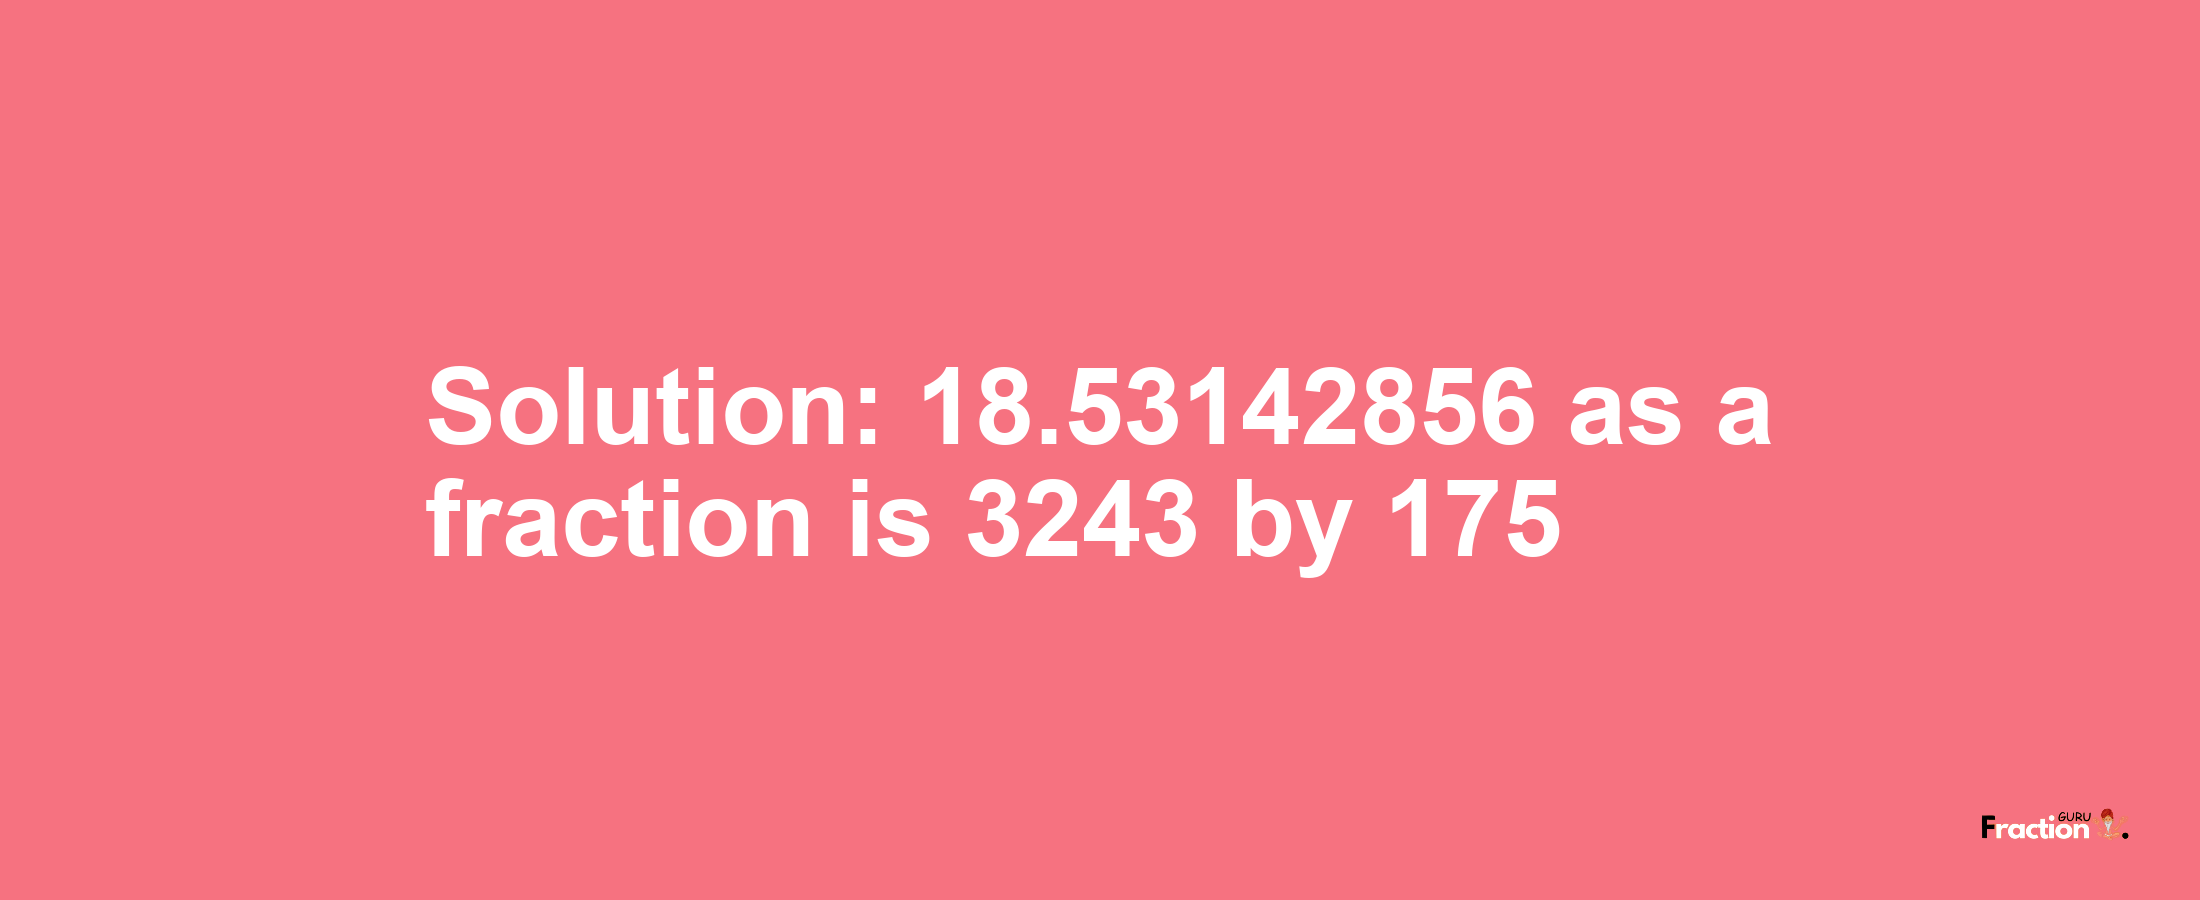 Solution:18.53142856 as a fraction is 3243/175